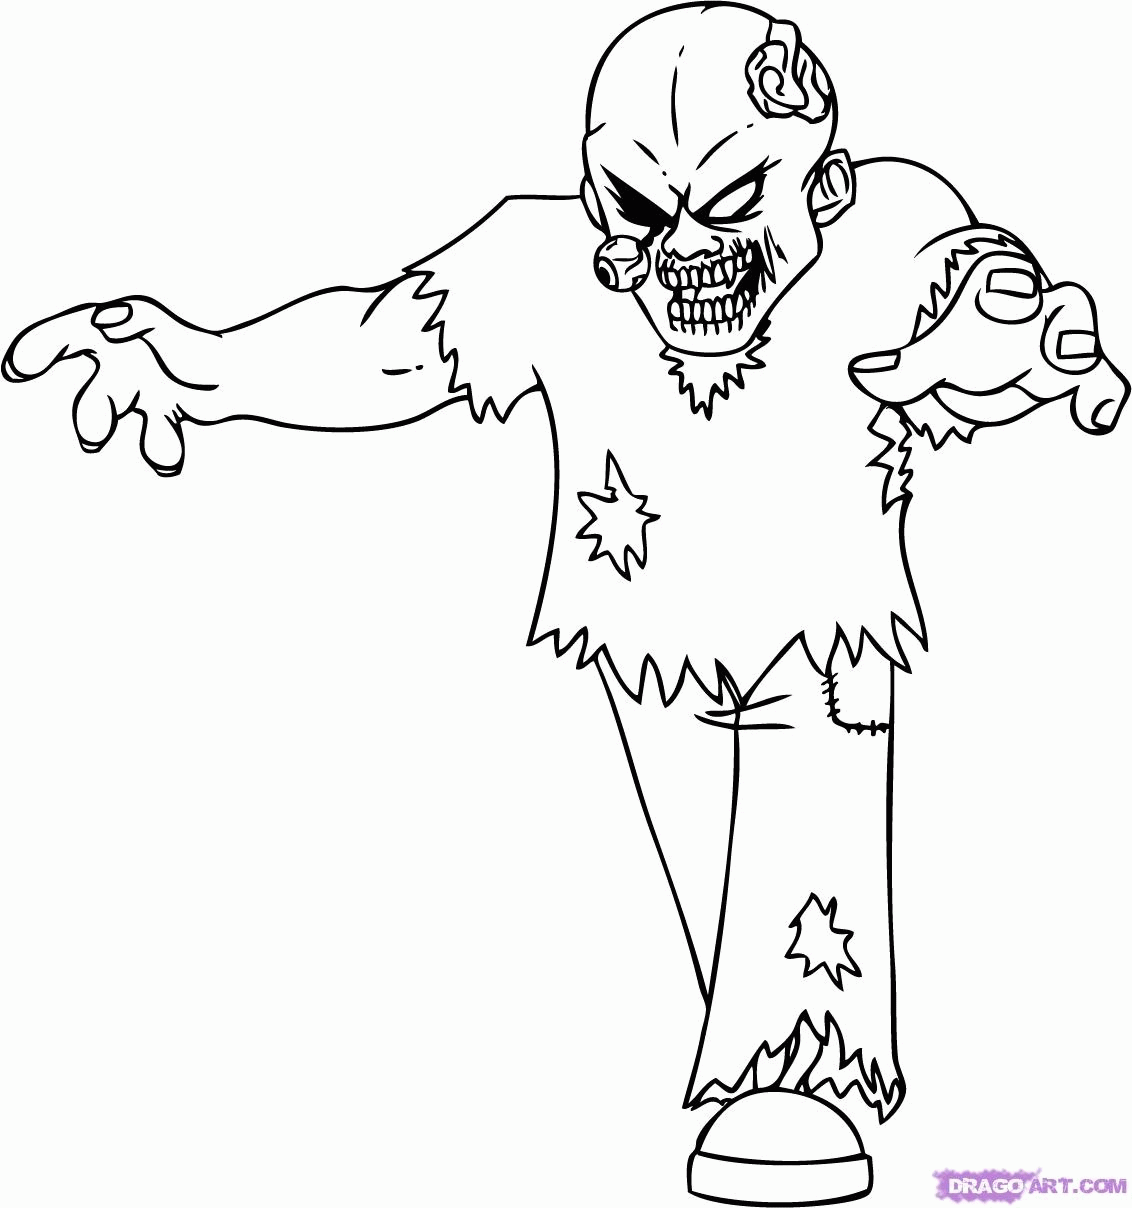 21 Free Pictures for: Zombie Coloring Pages. Temoon.us